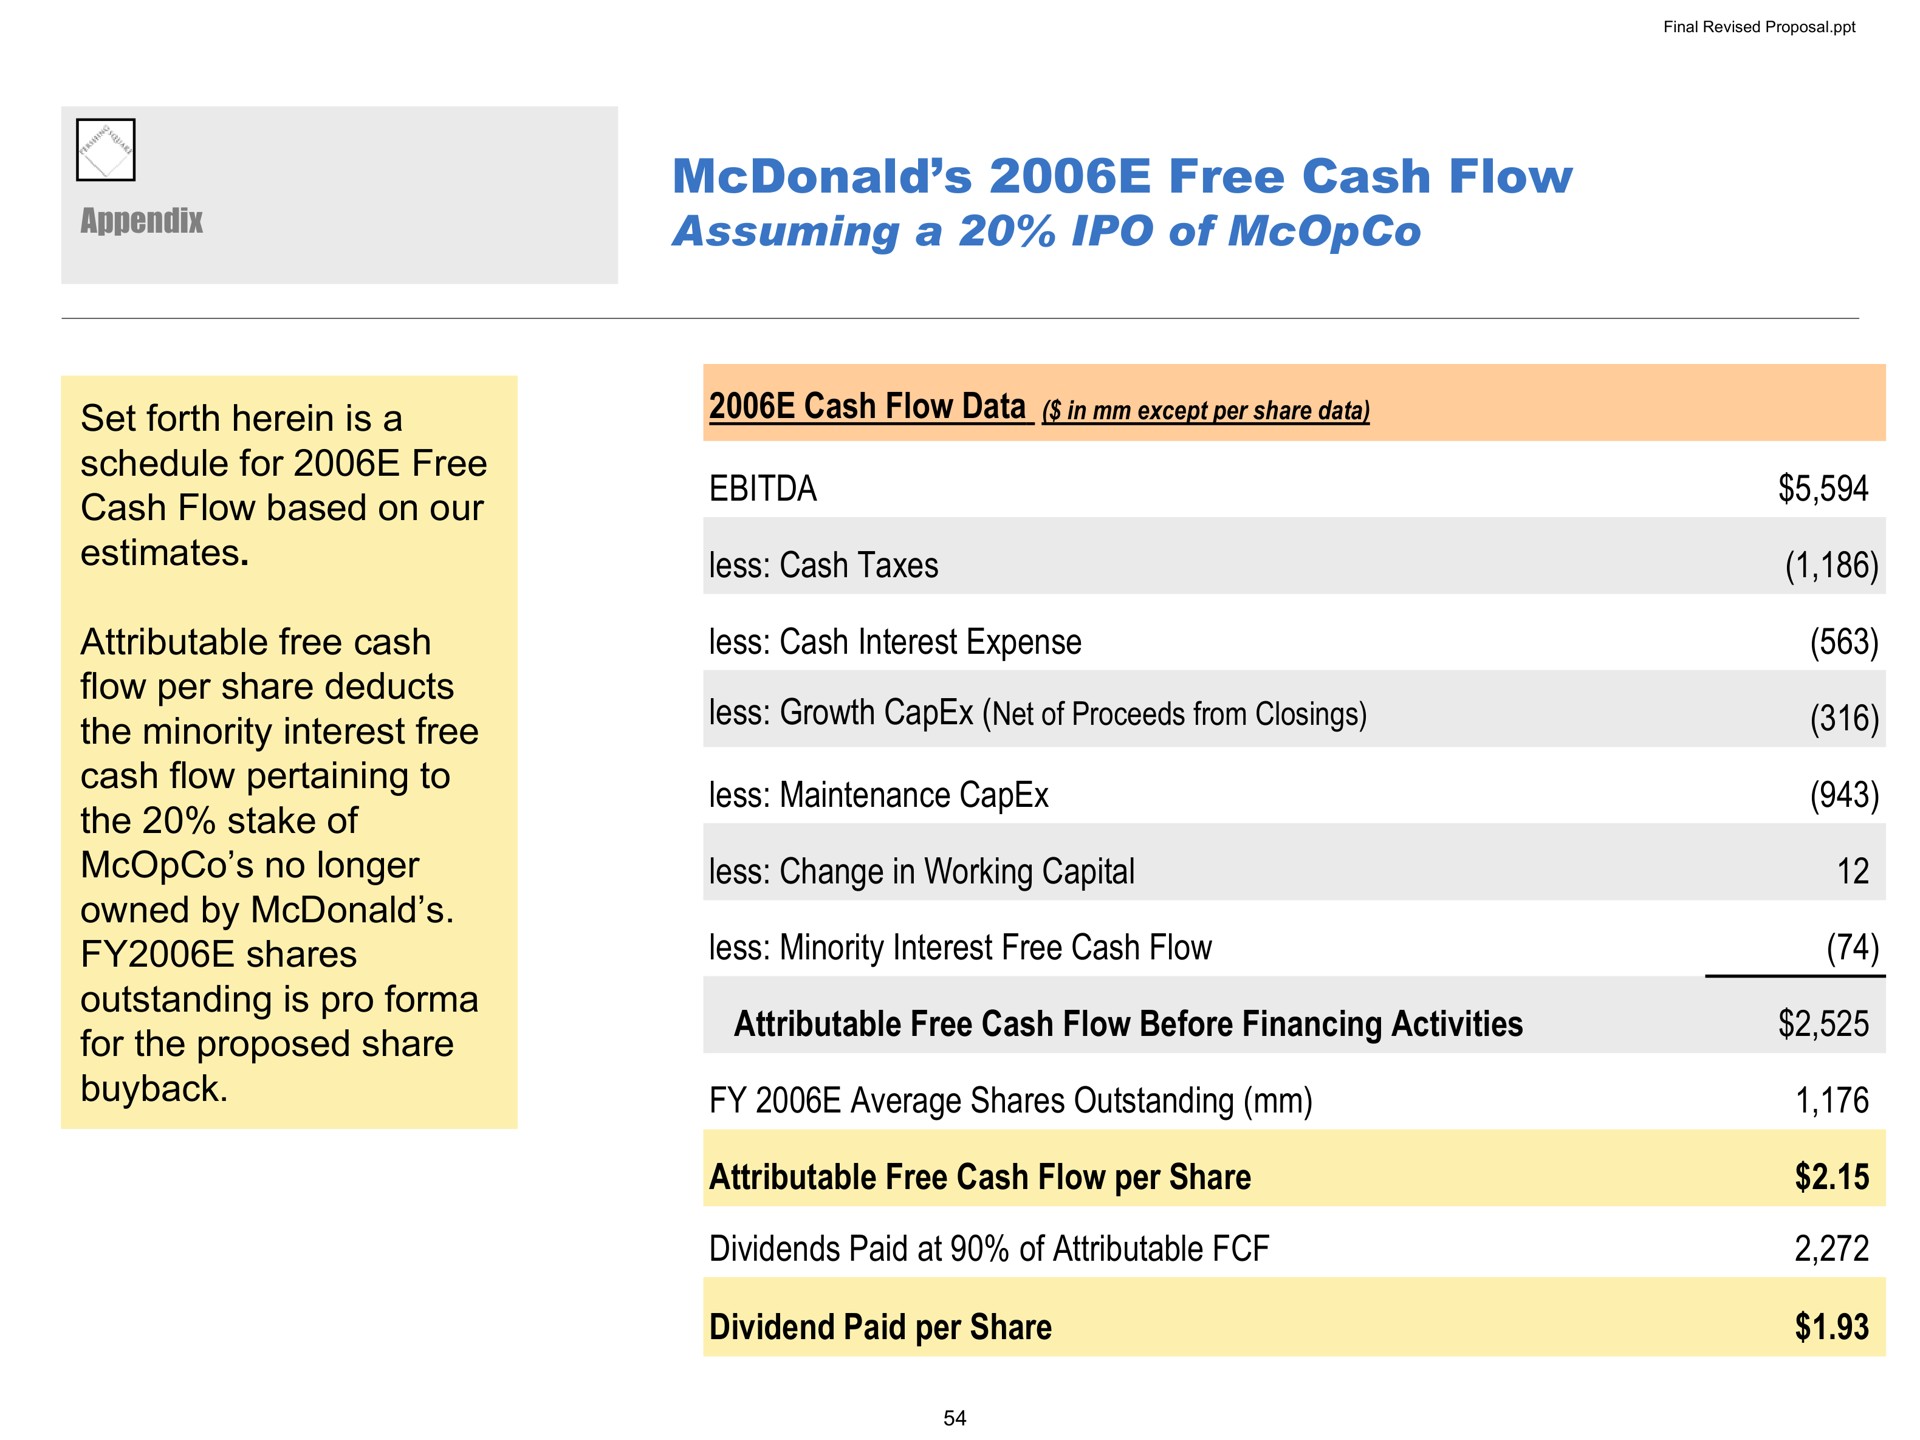 free cash flow assuming a of set forth herein is a schedule for free cash flow based on our estimates attributable free cash flow per share deducts the minority interest free cash flow pertaining to the stake of no longer owned by shares outstanding is pro for the proposed share less cash taxes less cash interest expense less maintenance less change in working capital less minority interest free cash flow attributable free cash flow before financing activities average shares outstanding attributable free cash flow per share dividends paid at of attributable dividend paid per share data gin except data growth net proceeds from closings | Pershing Square